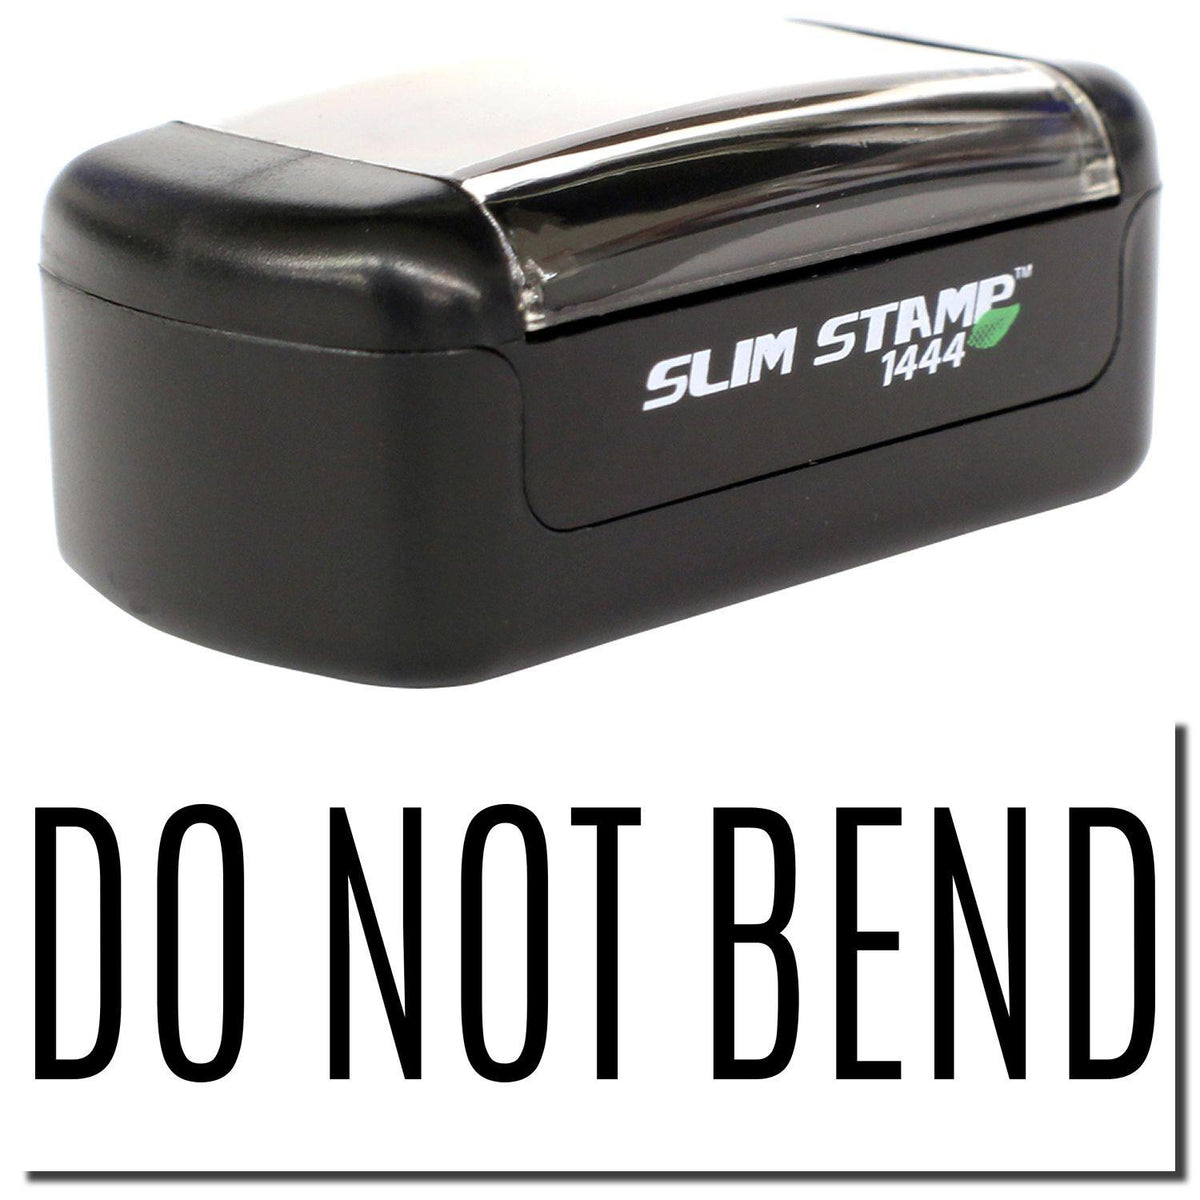 A stock office pre-inked stamp with a stamped image showing how the text &quot;DO NOT BEND&quot; is displayed after stamping.